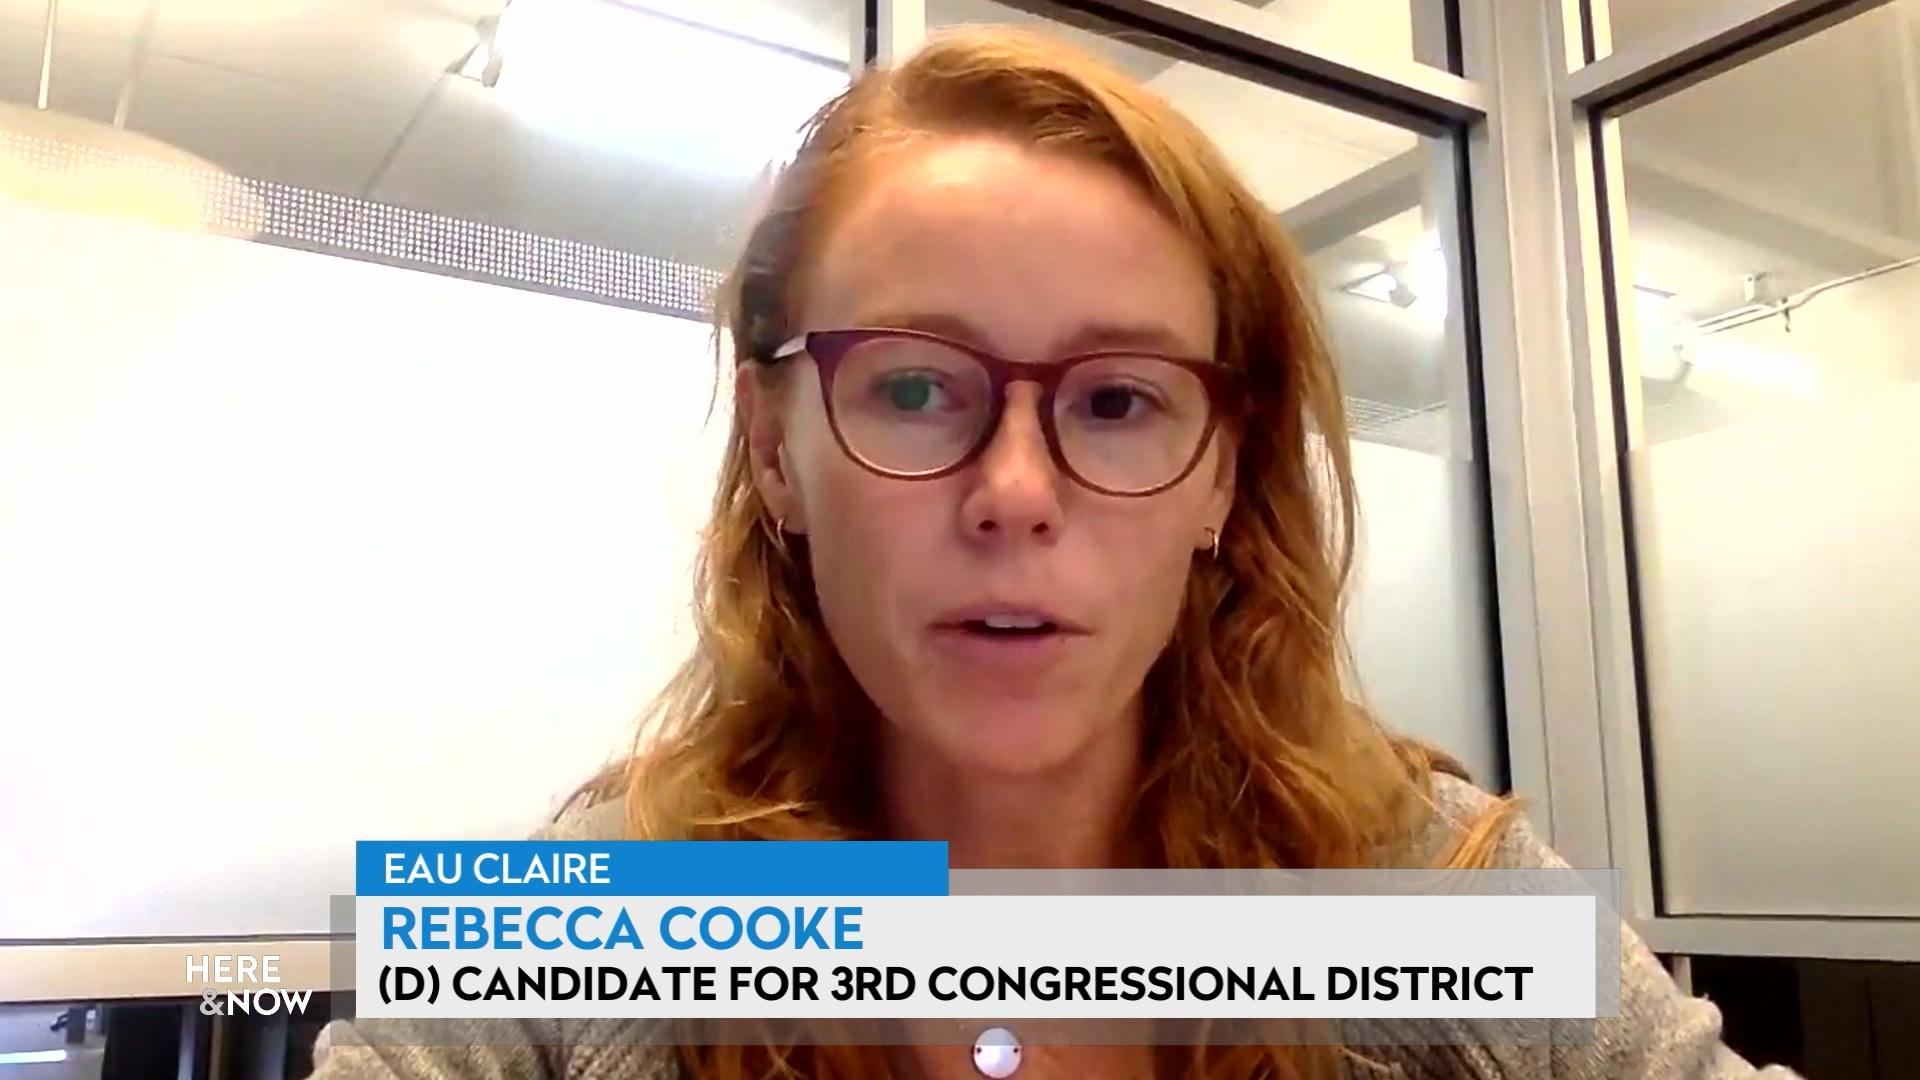 Cooke on 3rd Congressional District run